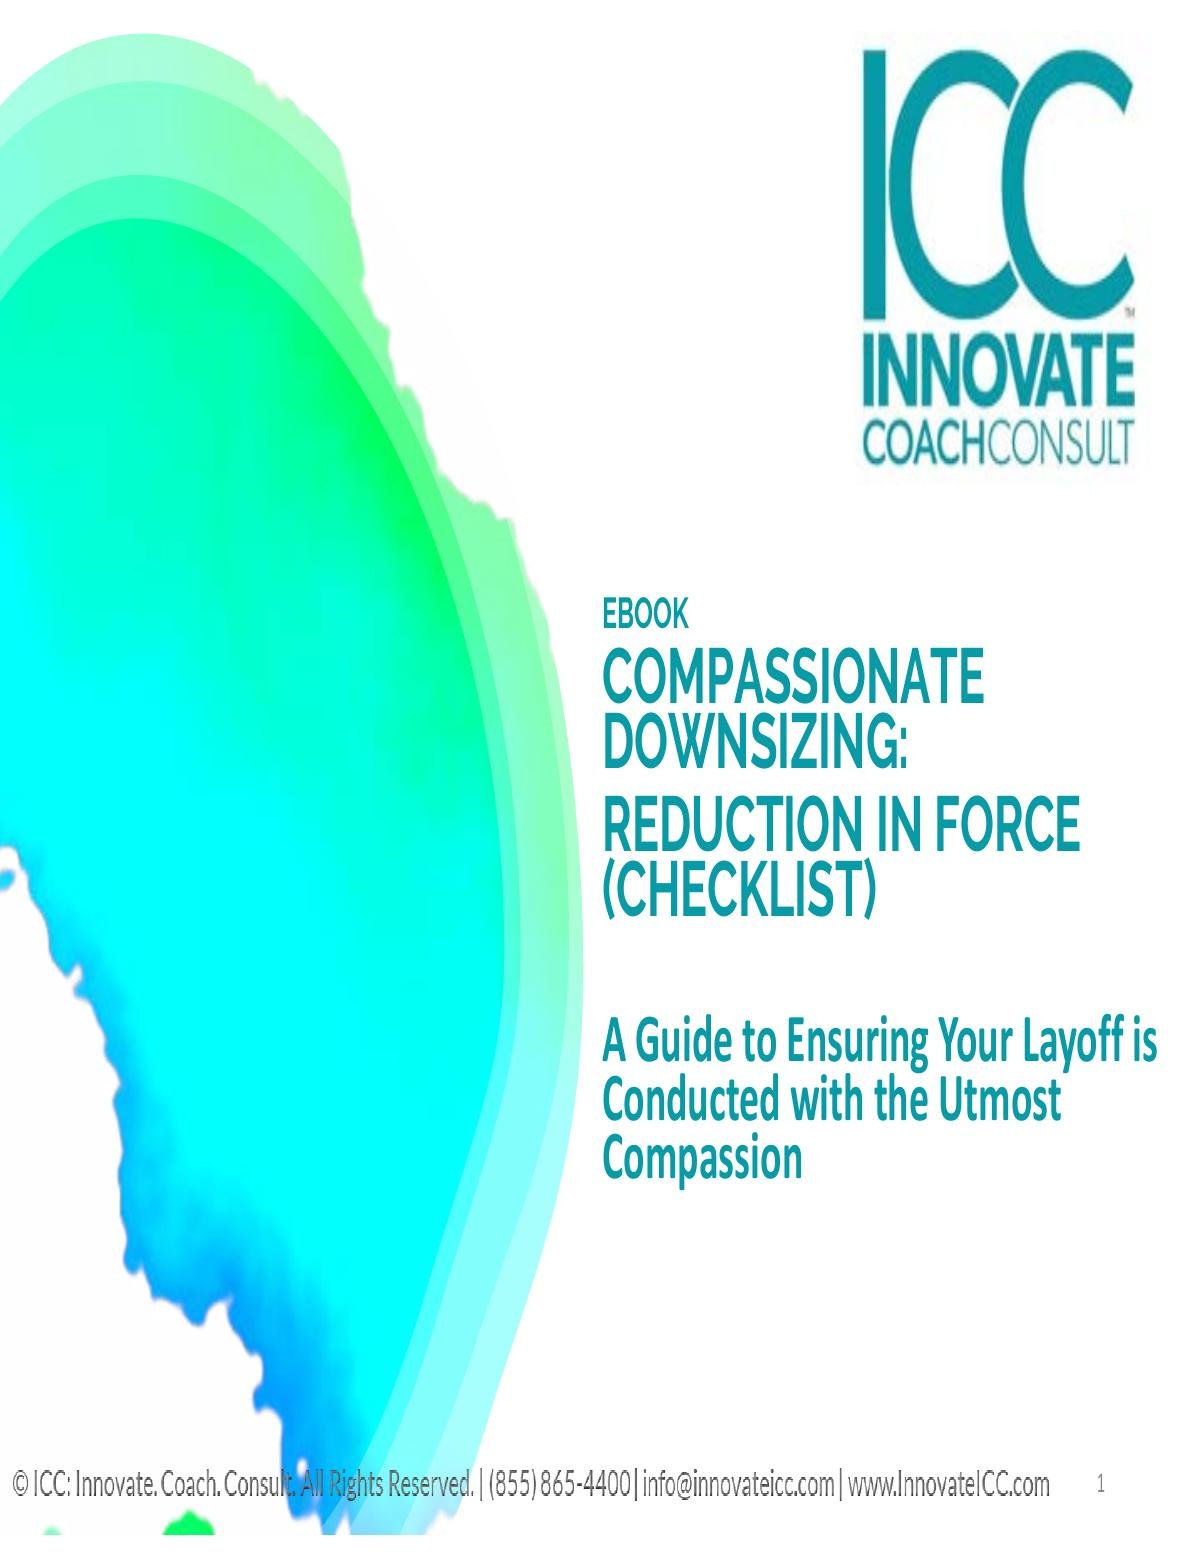 Compassionate Downsizing: A Reduction-In-Force (Checklist) 